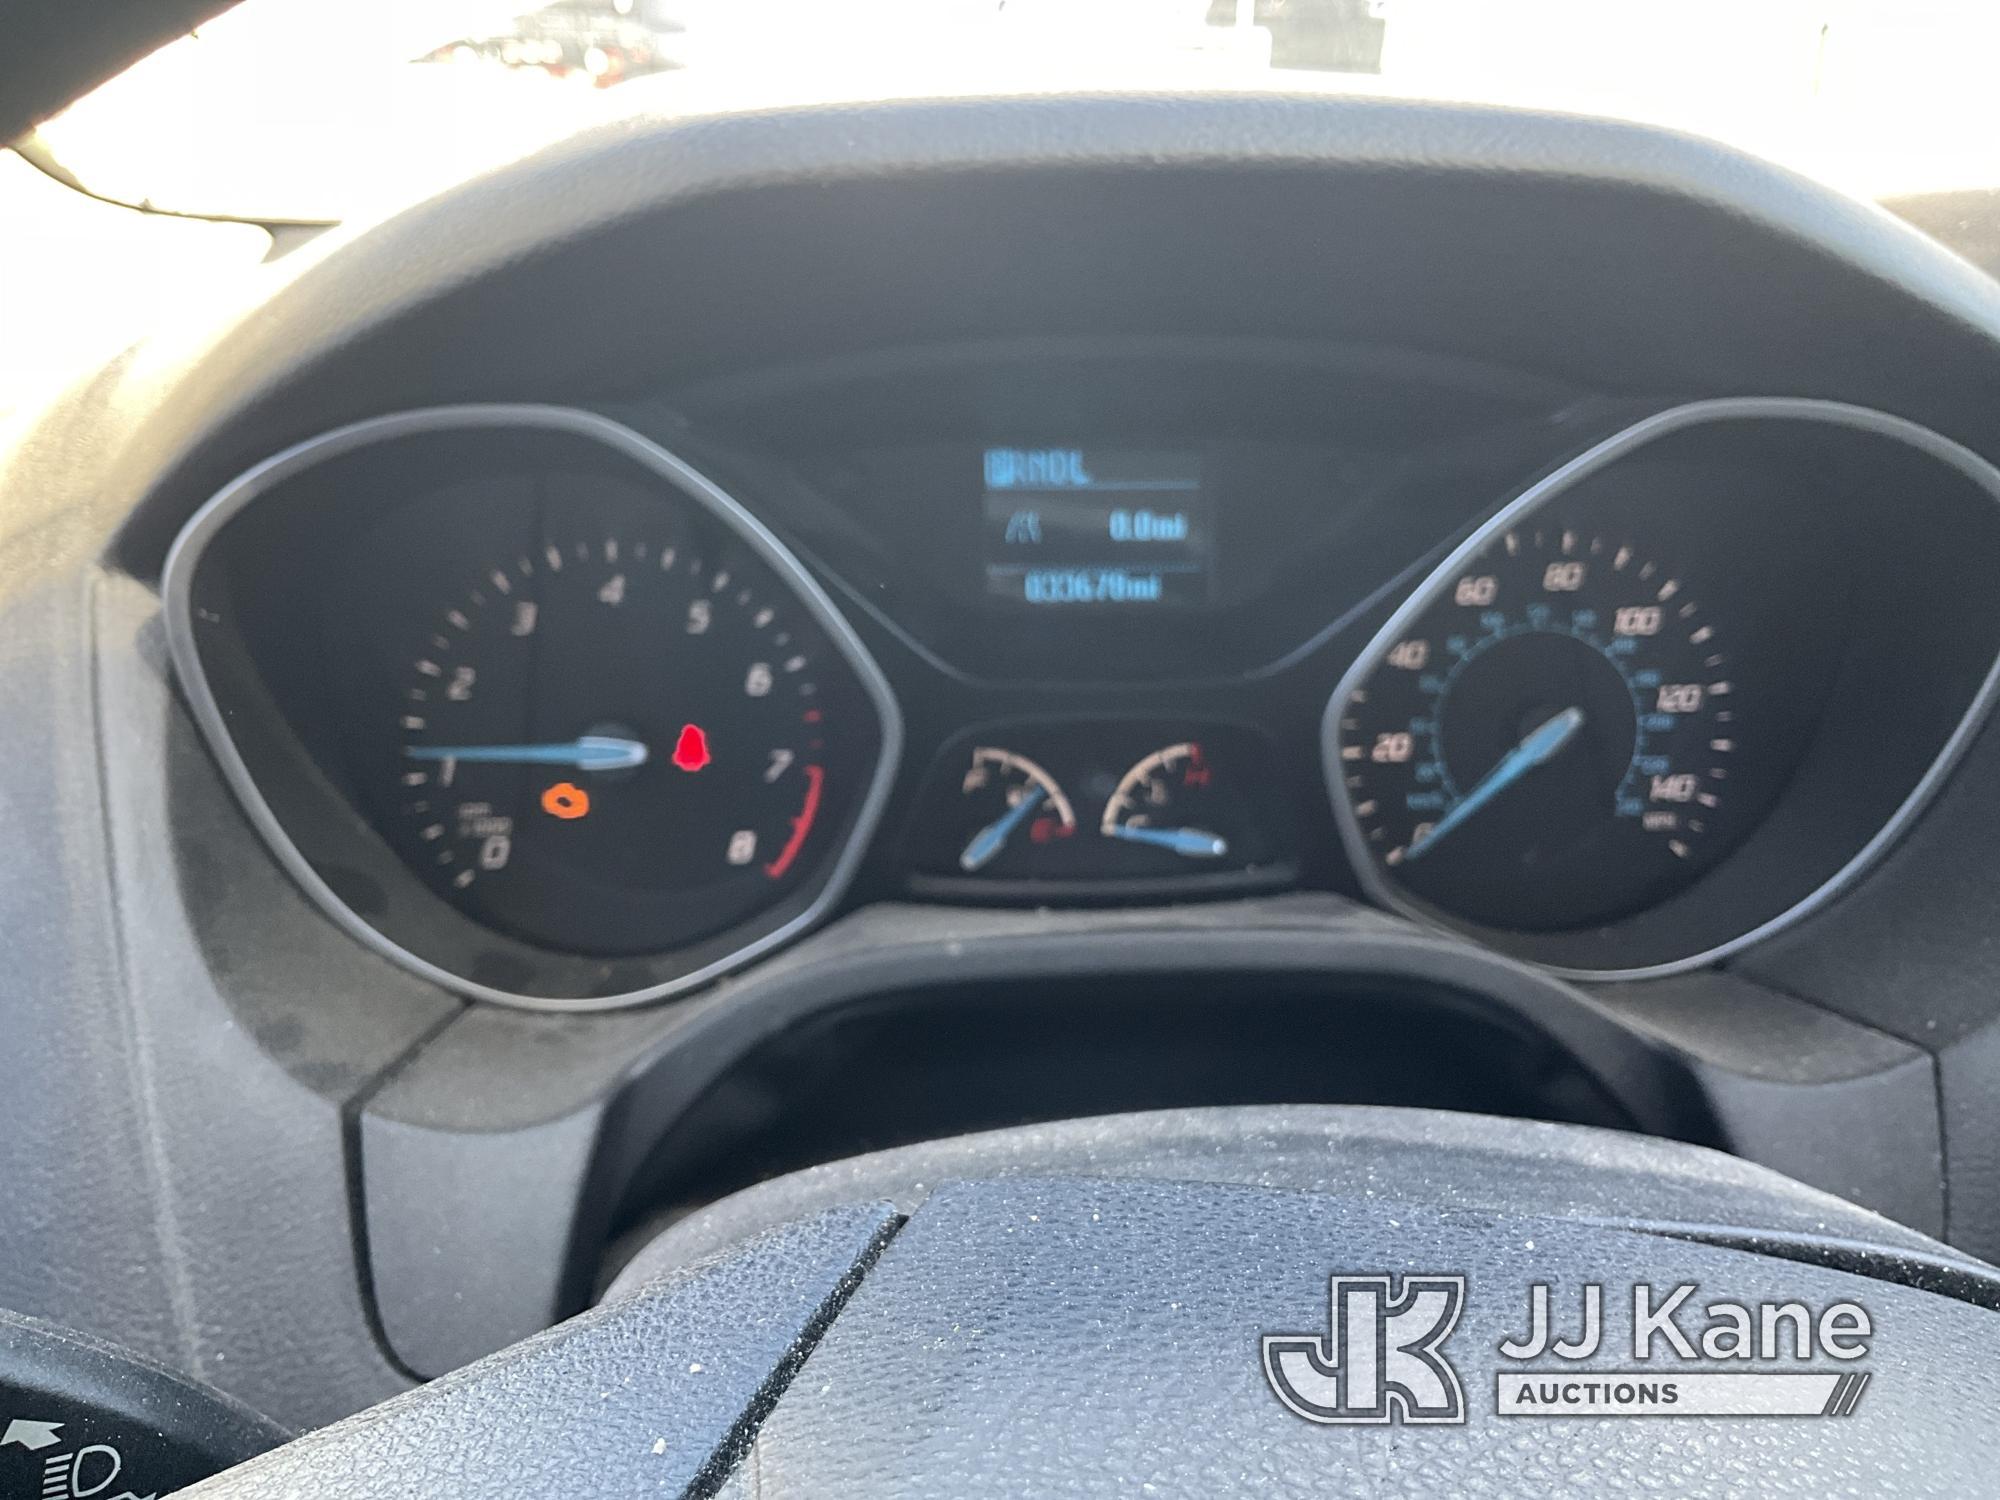 (Las Vegas, NV) 2014 Ford Focus Check Engine Light On, Bad Transmission, Bad Front Tire Jump To Star